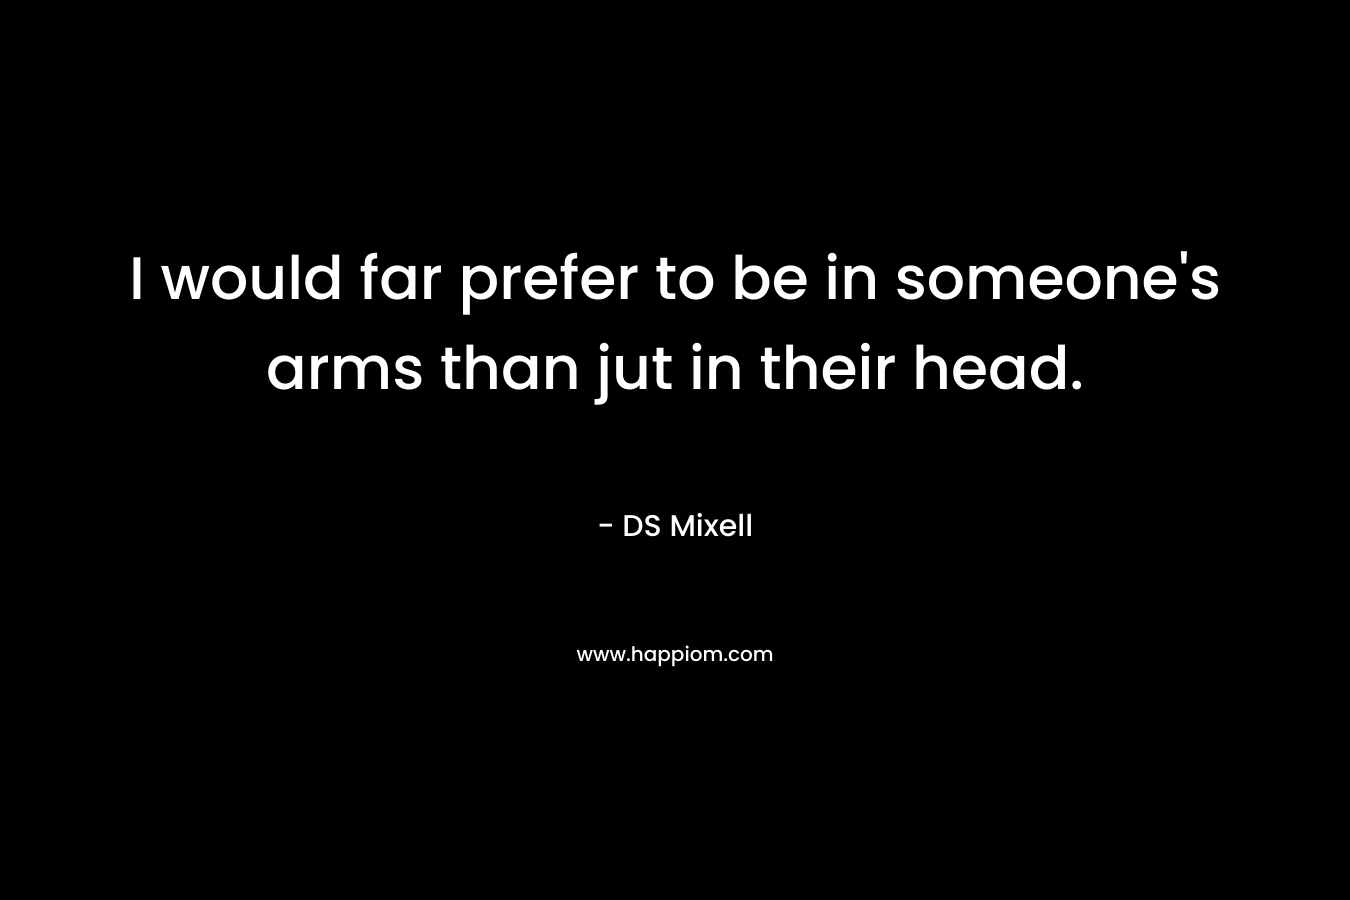 I would far prefer to be in someone's arms than jut in their head.